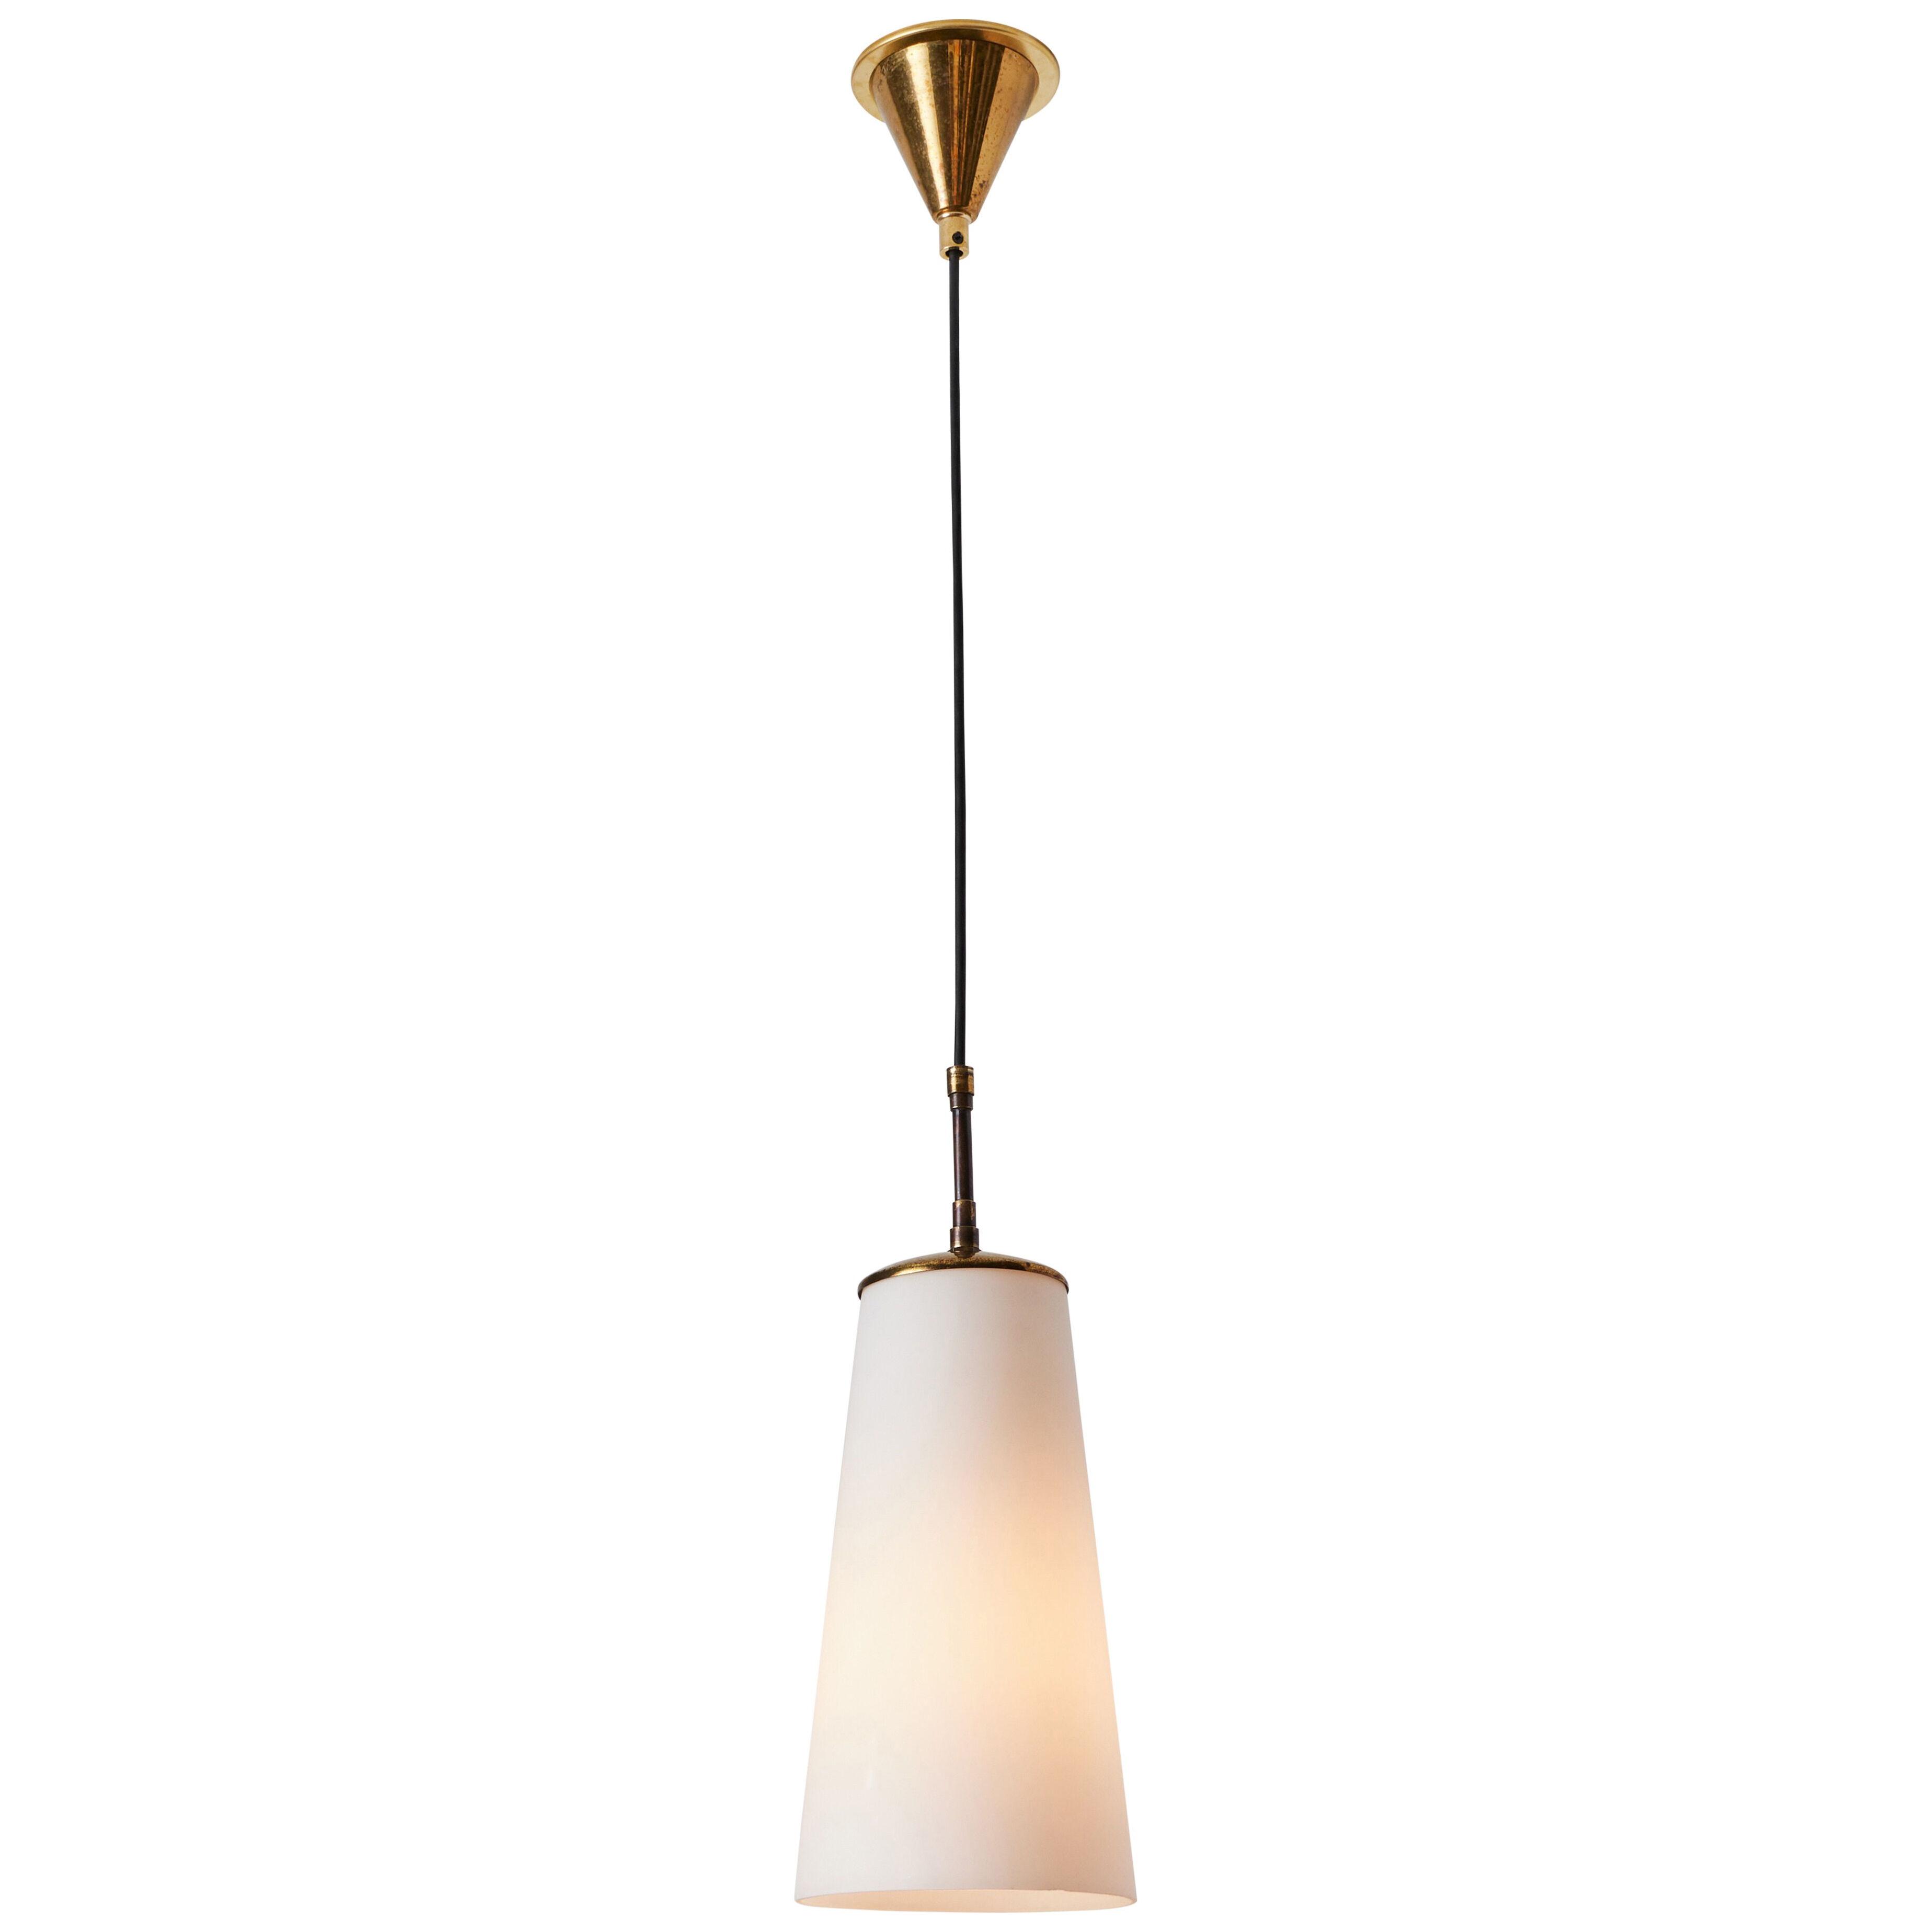 1950s Brass and Opaline Glass Pendant Lamp Attributed to Stilnovo